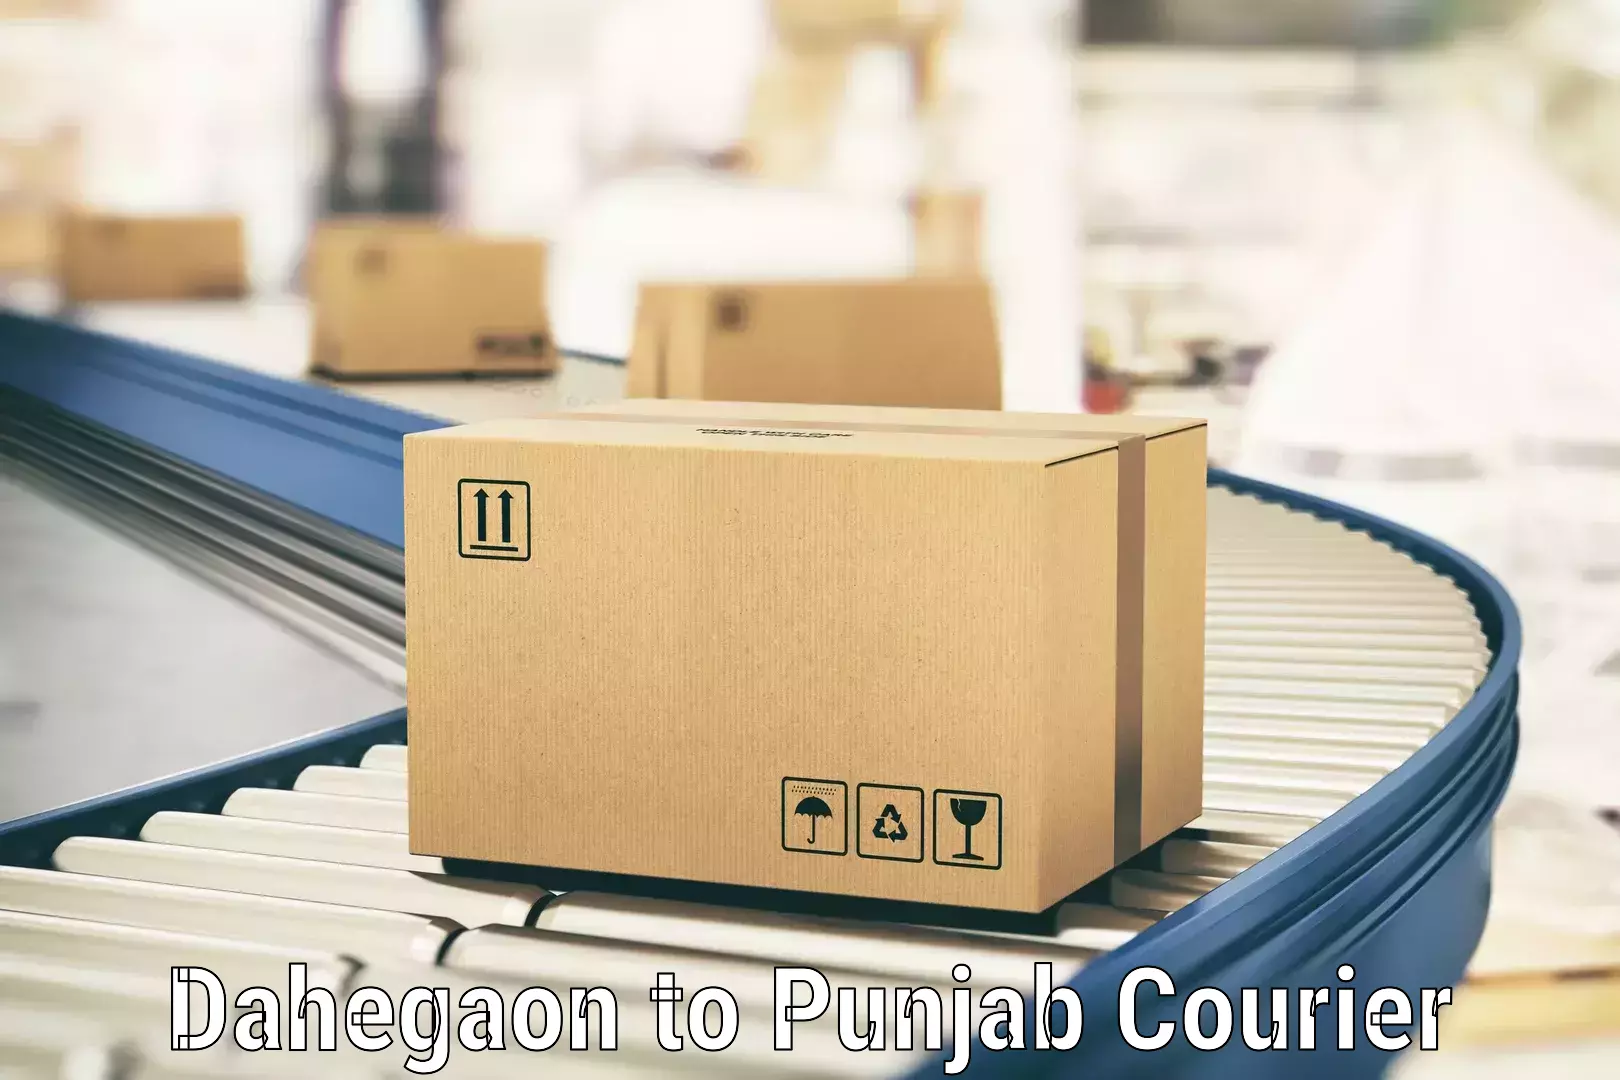 Full-service courier options in Dahegaon to Jalalabad